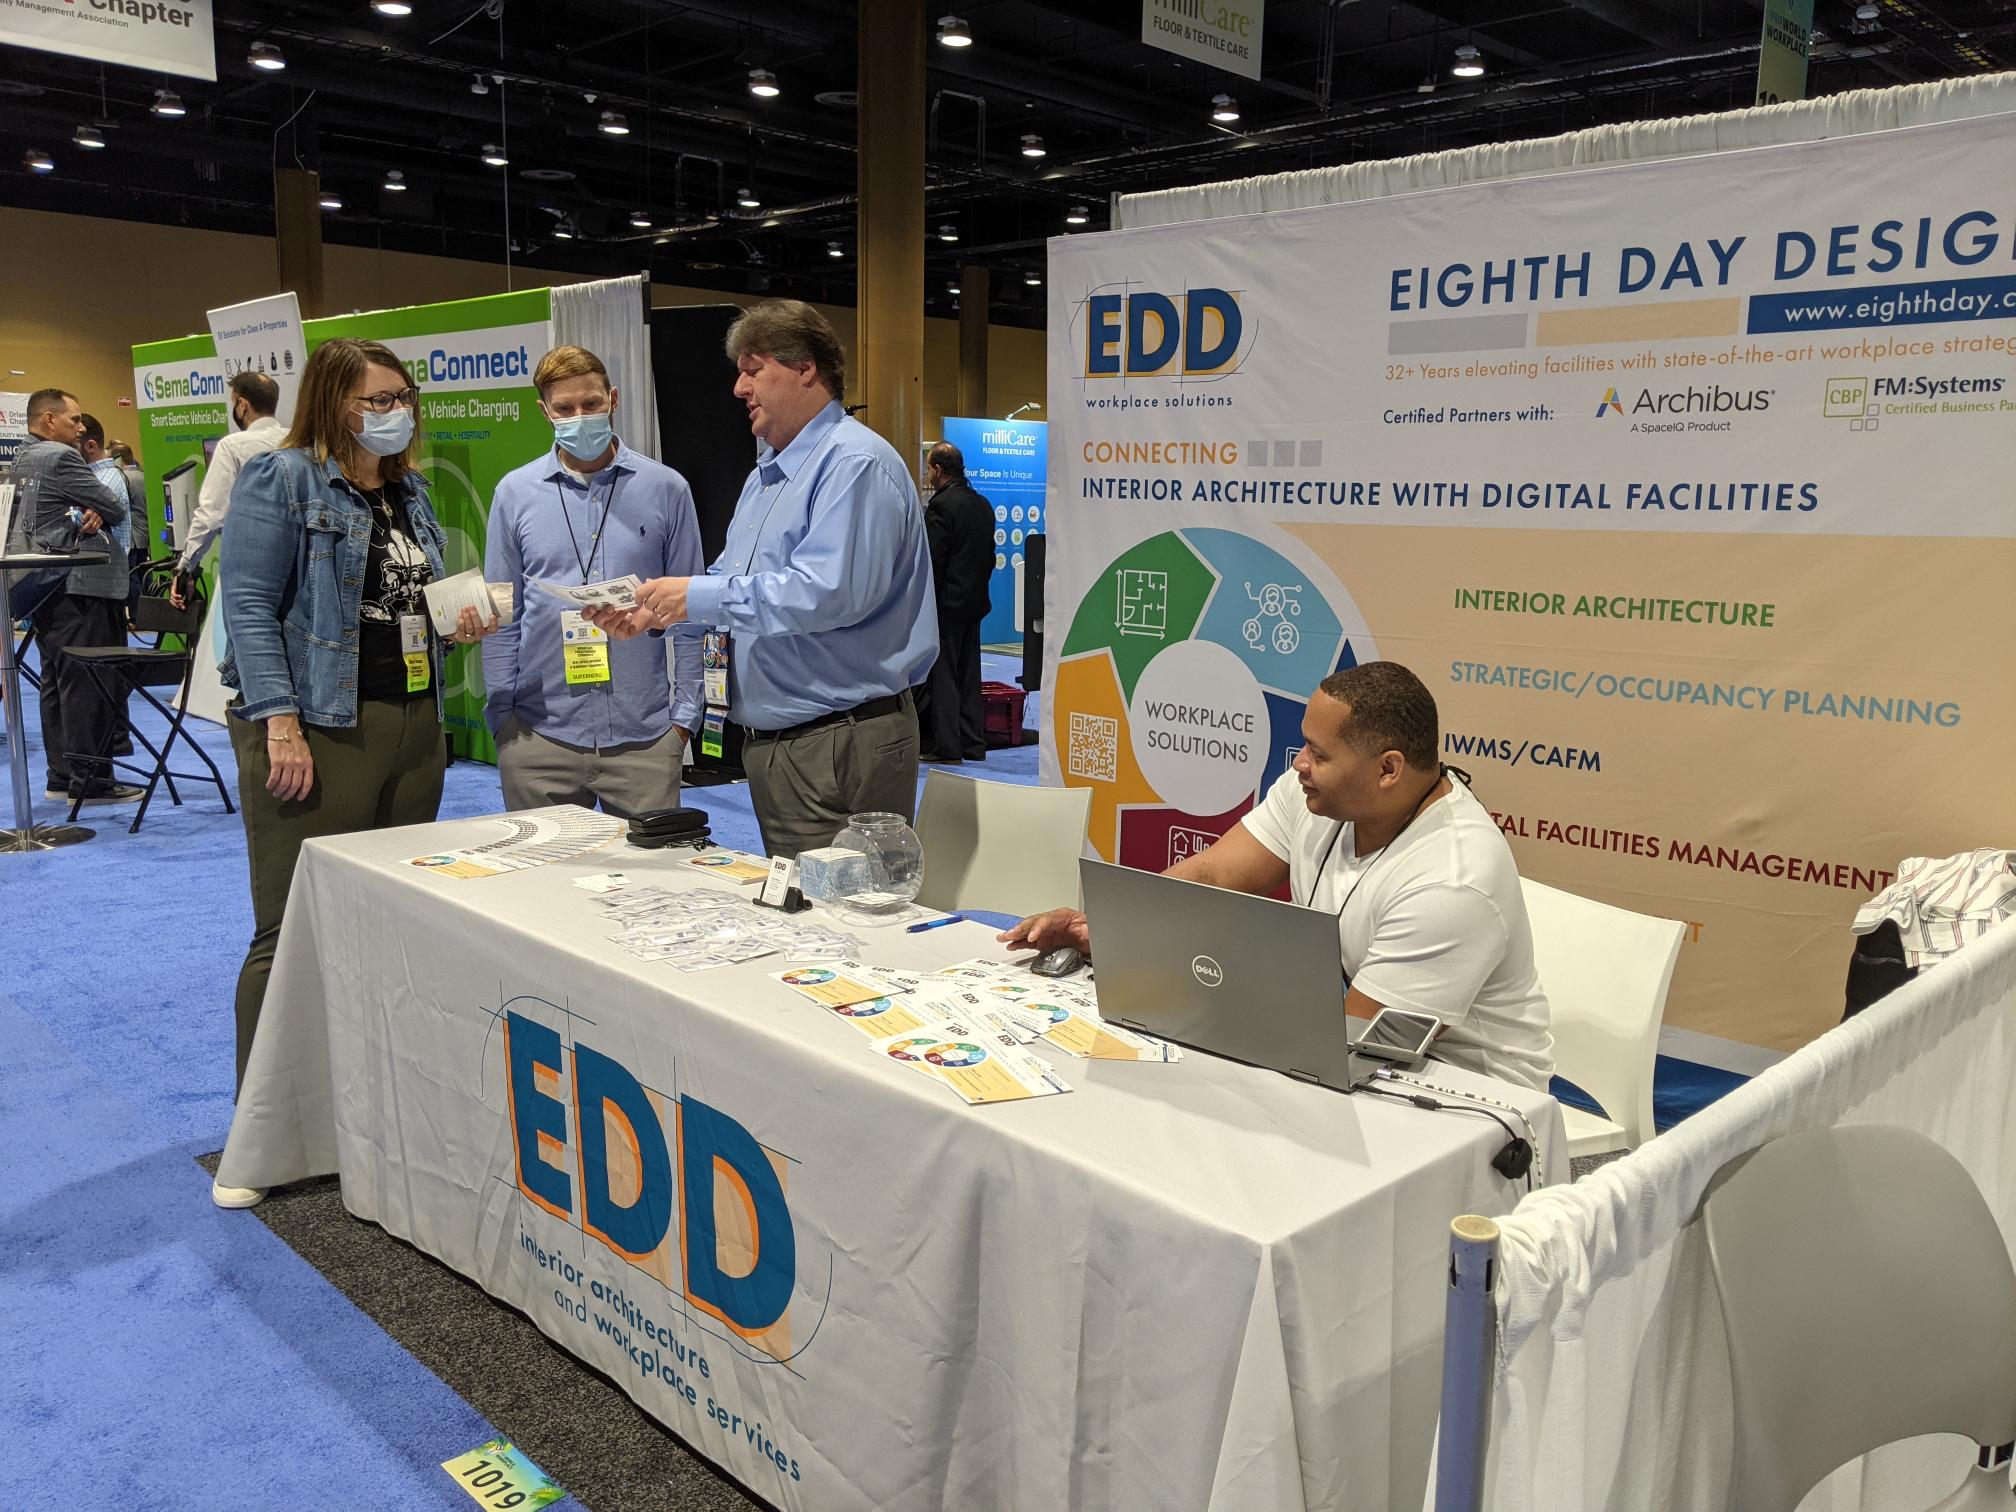 EDD Facilities Management Conference